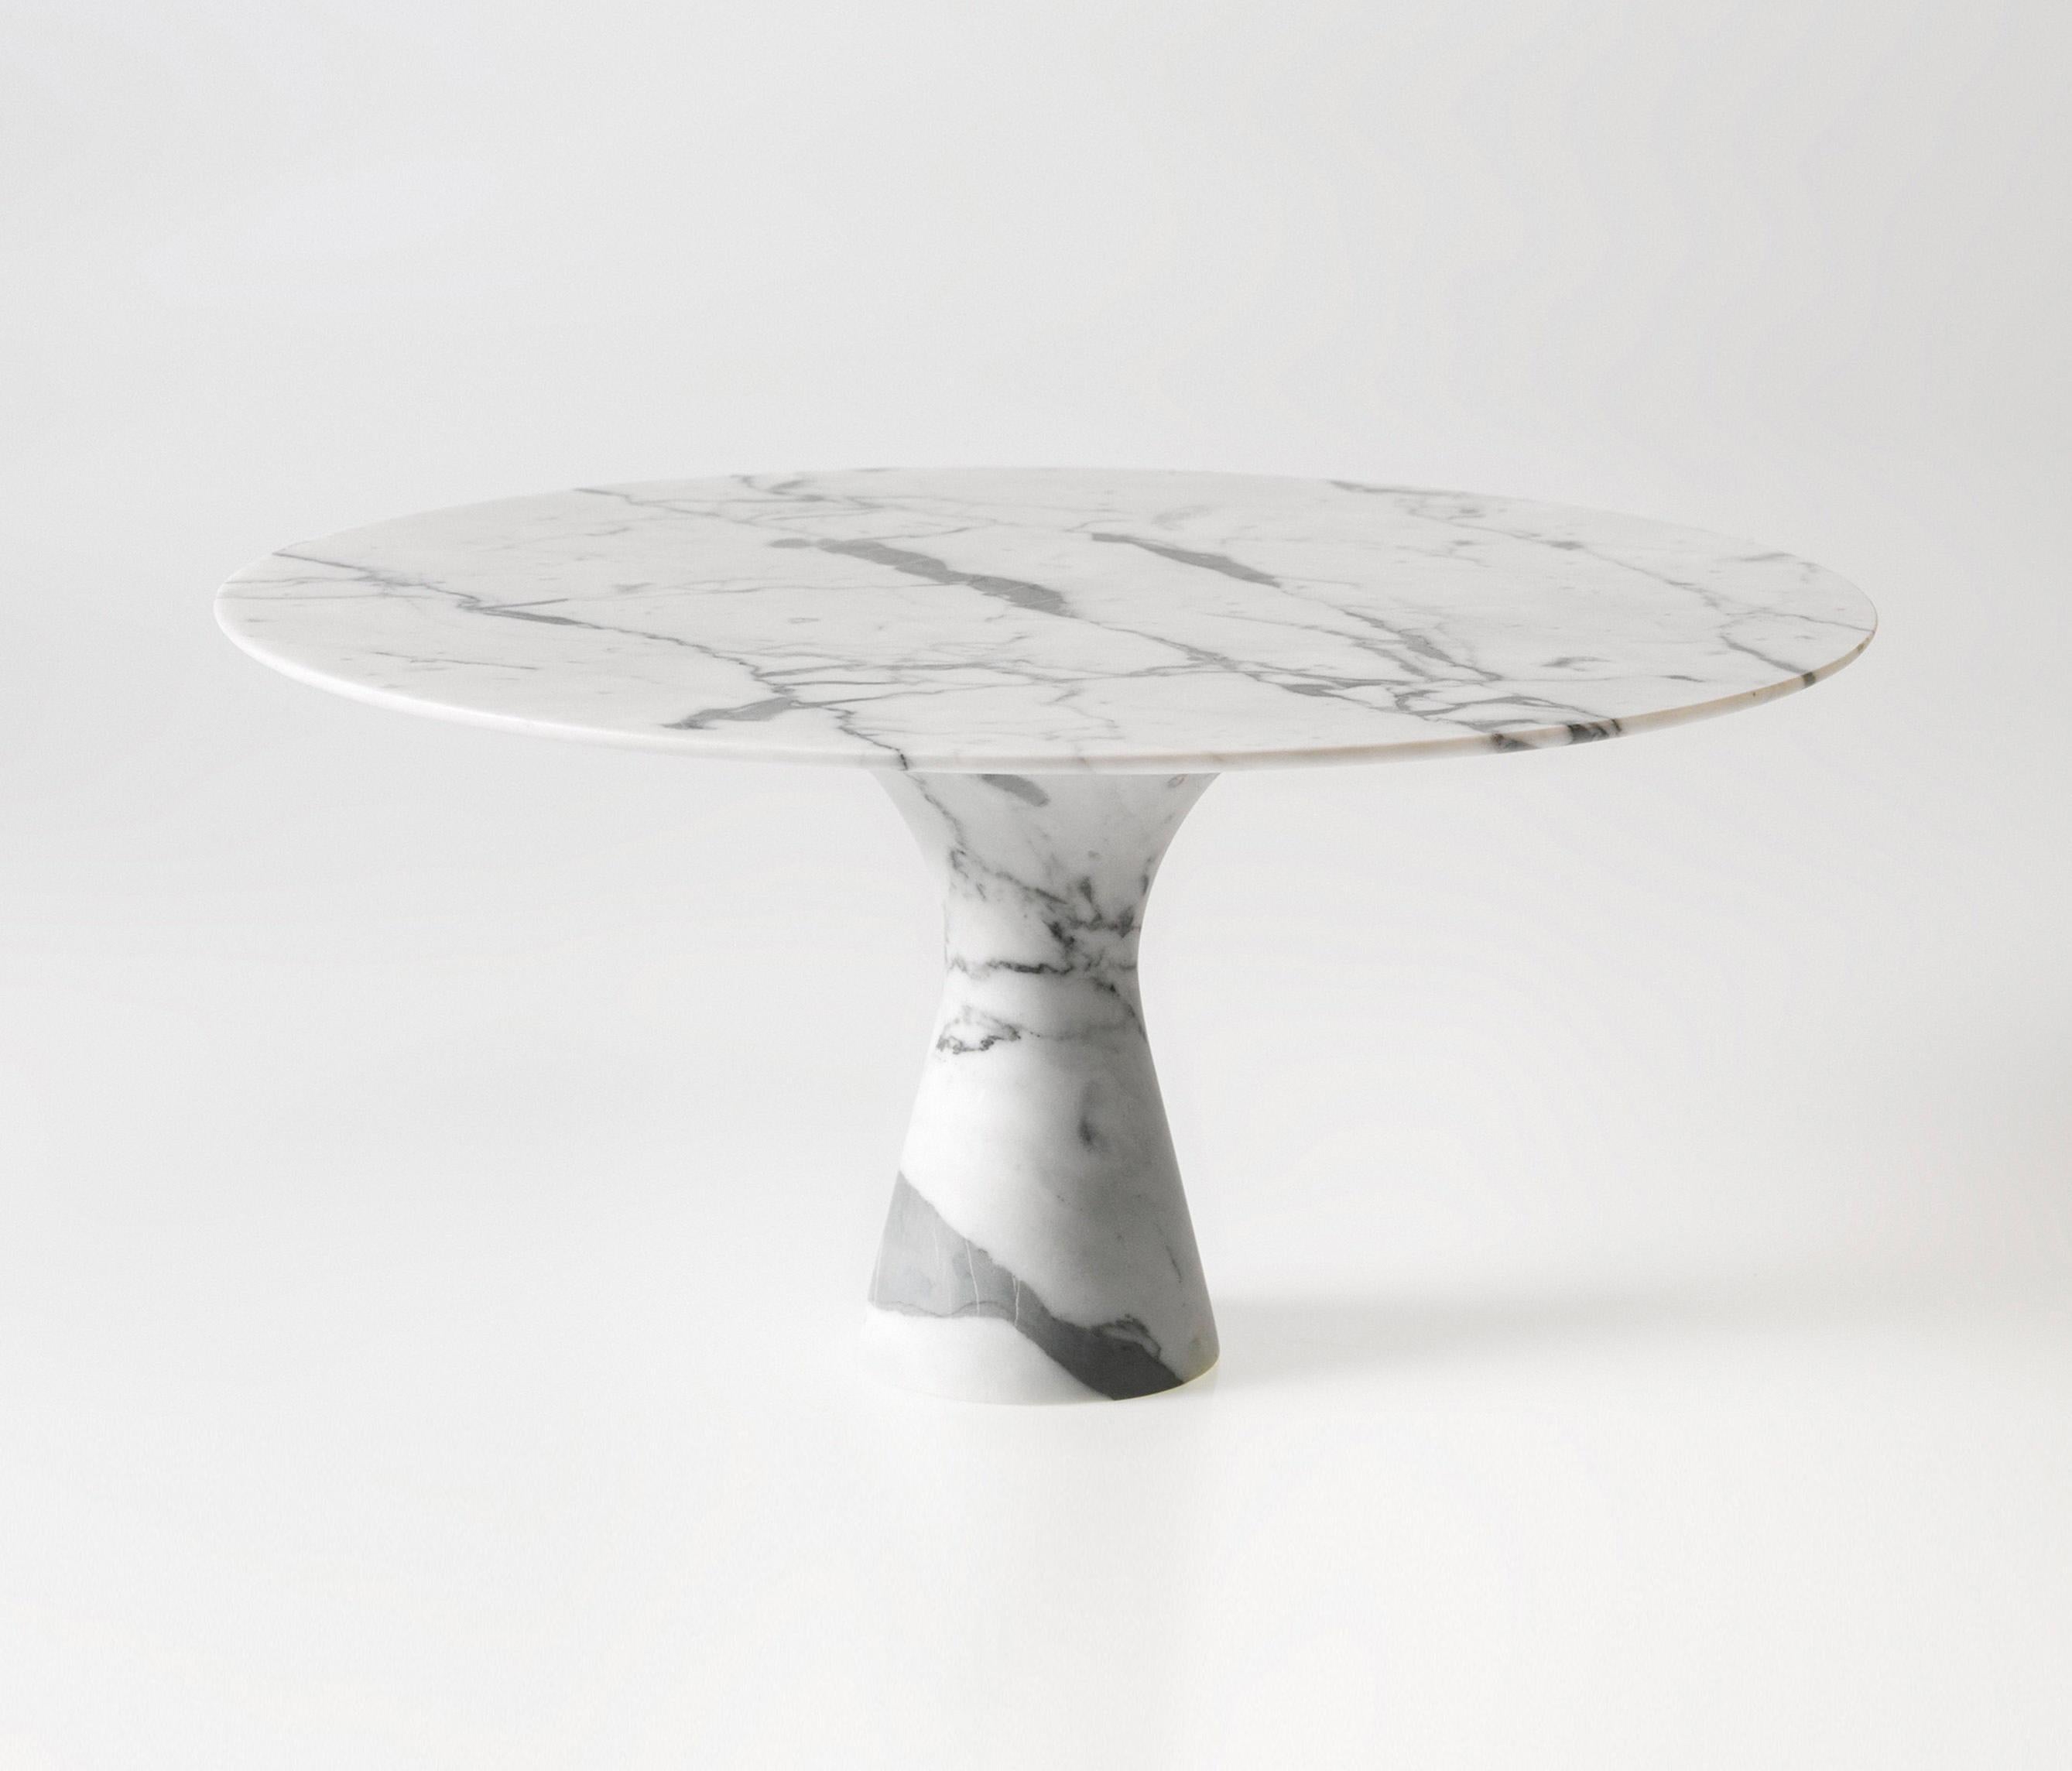 Kynos Refined Contemporary Marble Dining Table 130/75
Dimensions: 130 x 75 cm
Materials: Kynos Marble

Angelo is the essence of a round table in natural stone, a sculptural shape in robust material with elegant lines and refined finishes.

The